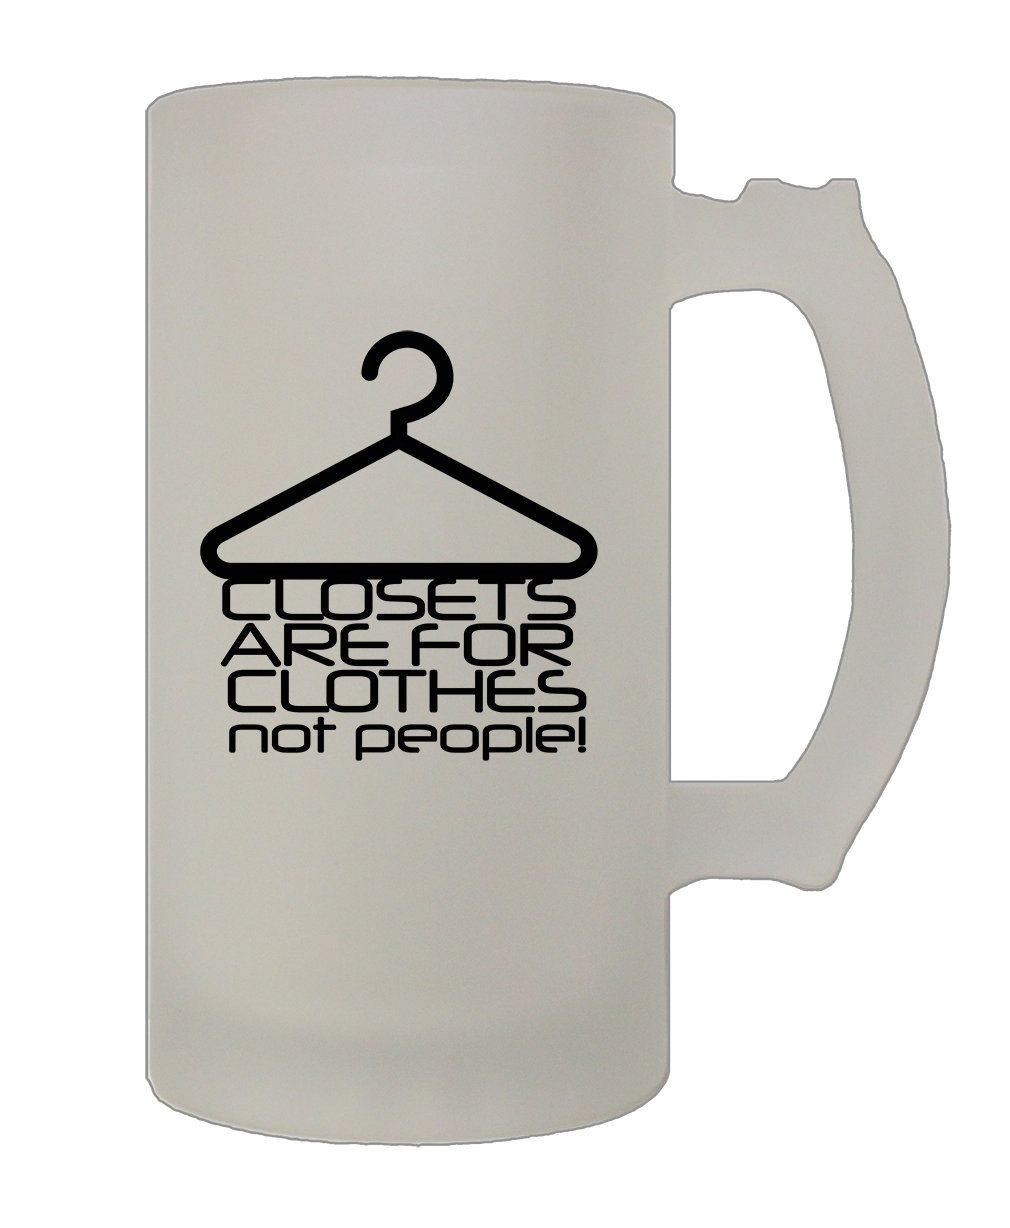 amazon com style in print closest are for clothes not people funny holidays 16 oz glass stein beer mug kitchen dining